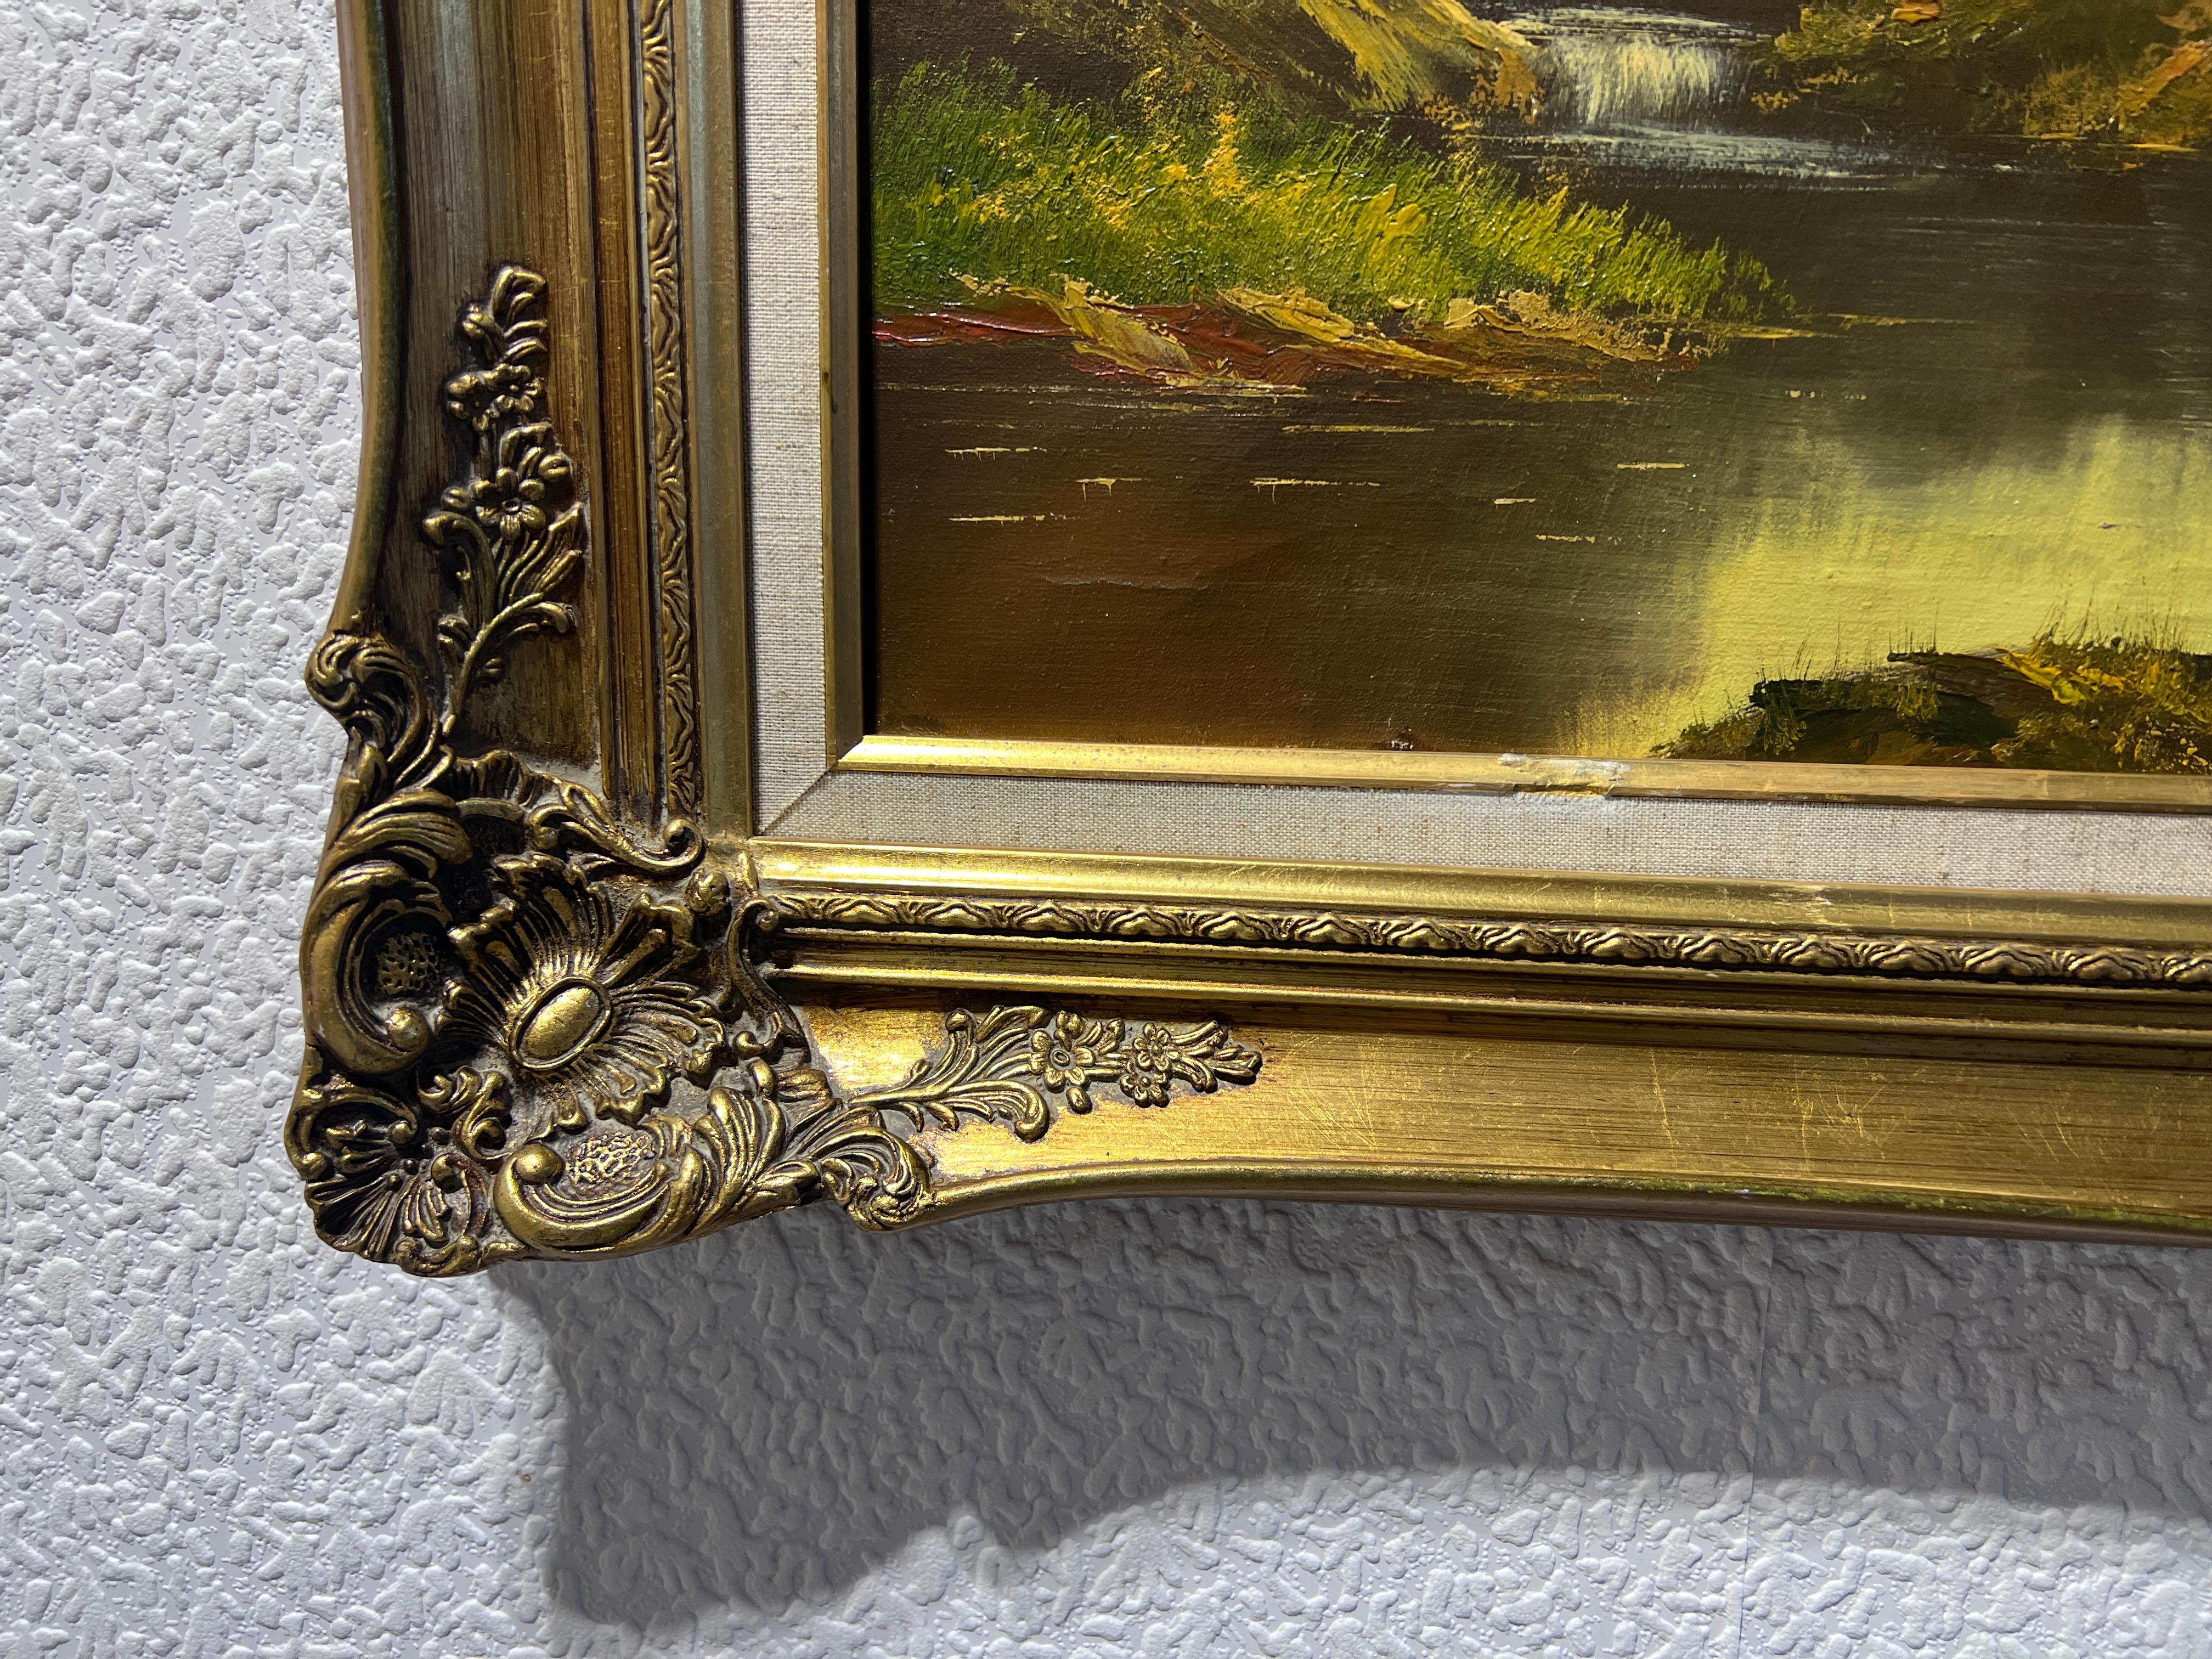 Up for sale is an original Large vintage oil painting on canvas depicting a beautiful summer landscape.

Signed illegible in the lower-right corner. Gorgeous ornate gold frame.

Condition: Good condition, some stable craquelures due to